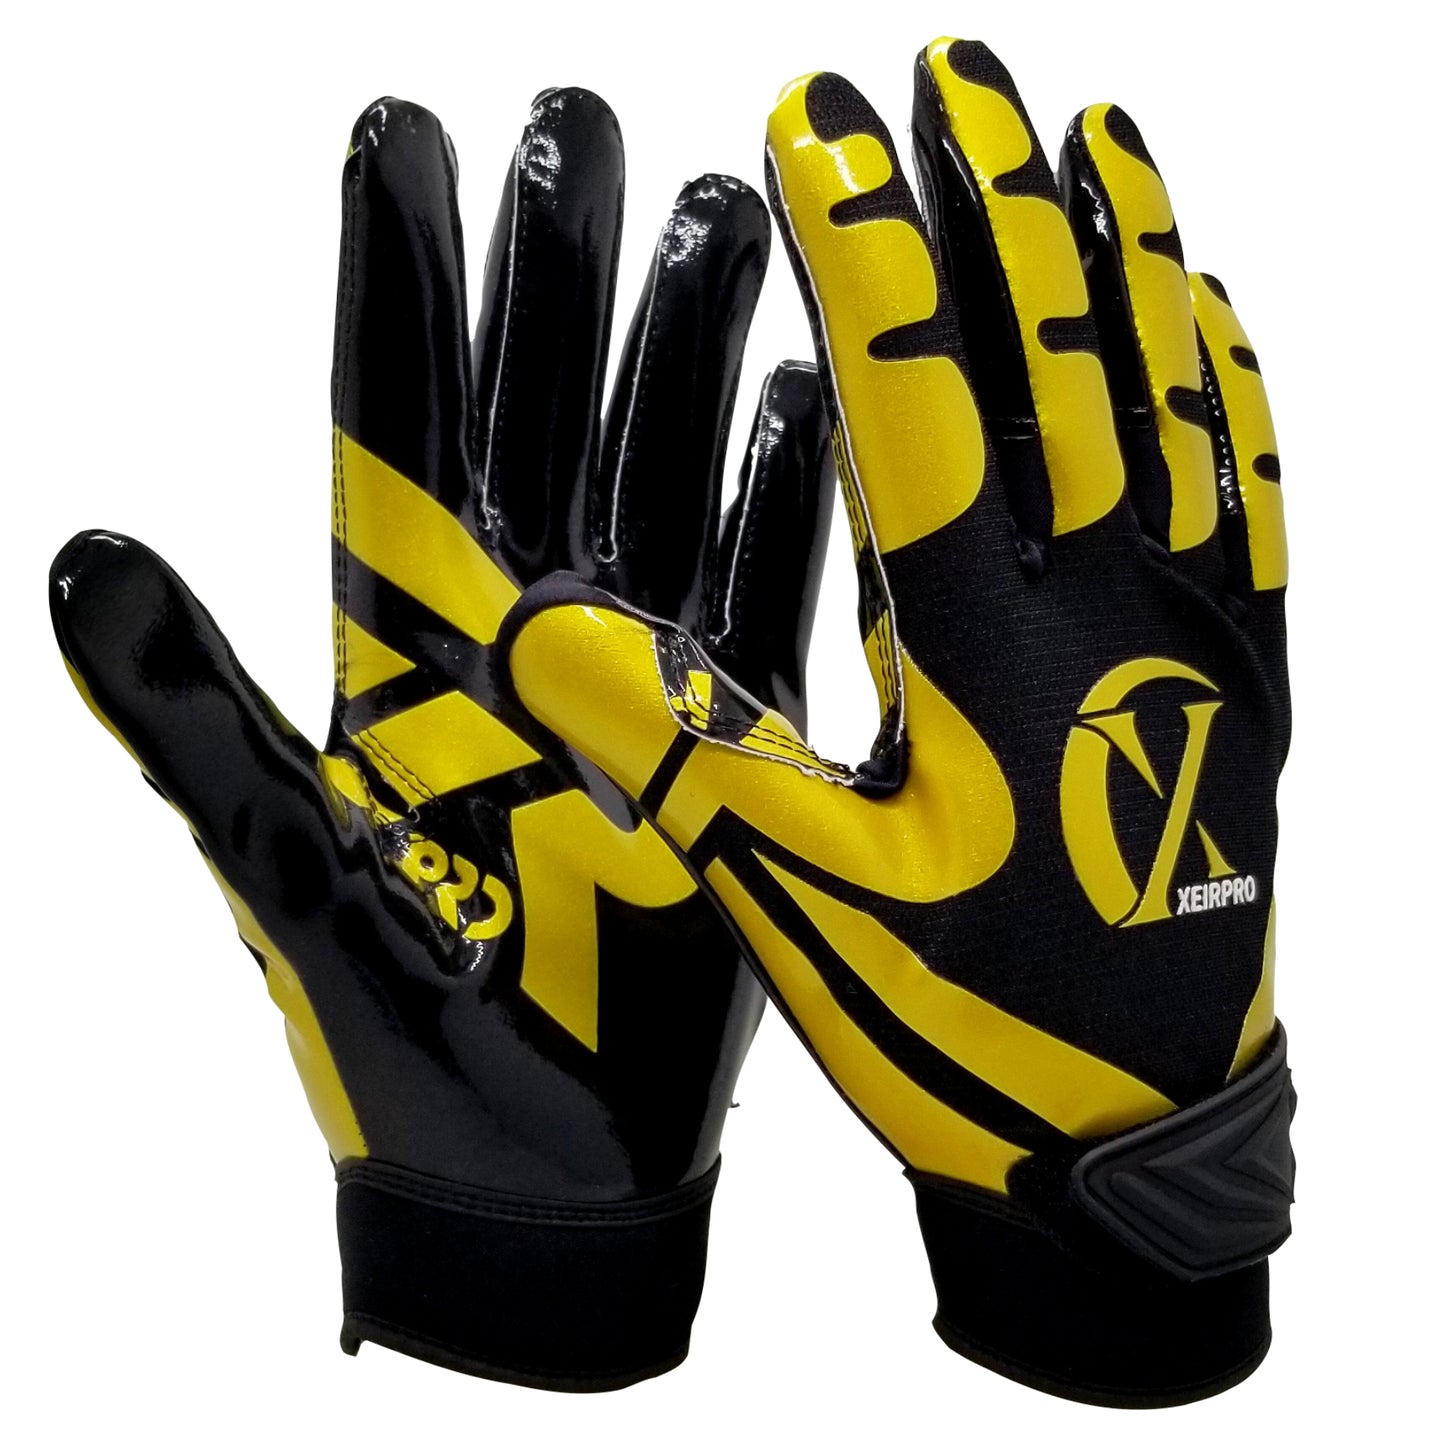 XEIR PRO Football Receiver Gloves (Youth Size) - Black